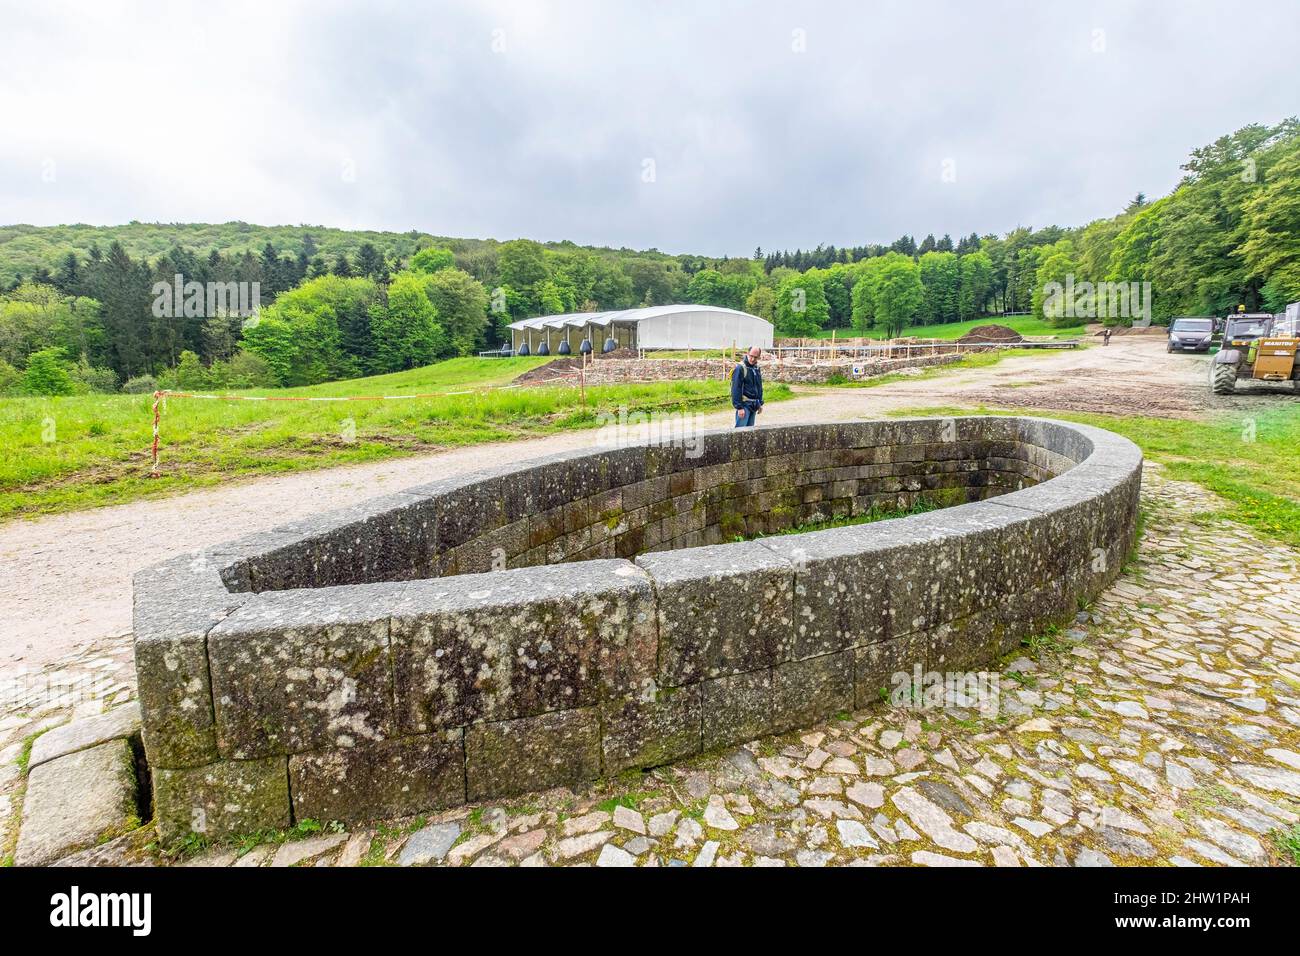 France, Saone et Loire, Saint Leger sous Beuvray, Bibracte, a Gaulish oppidum or fortified city, was the capital of the Aedui and one of the most important hillforts in Gaul, Monumental Fountain, Mont Beuvray, Parc Naturel Regional du Morvan (Regional Natural Park of Morvan) Stock Photo